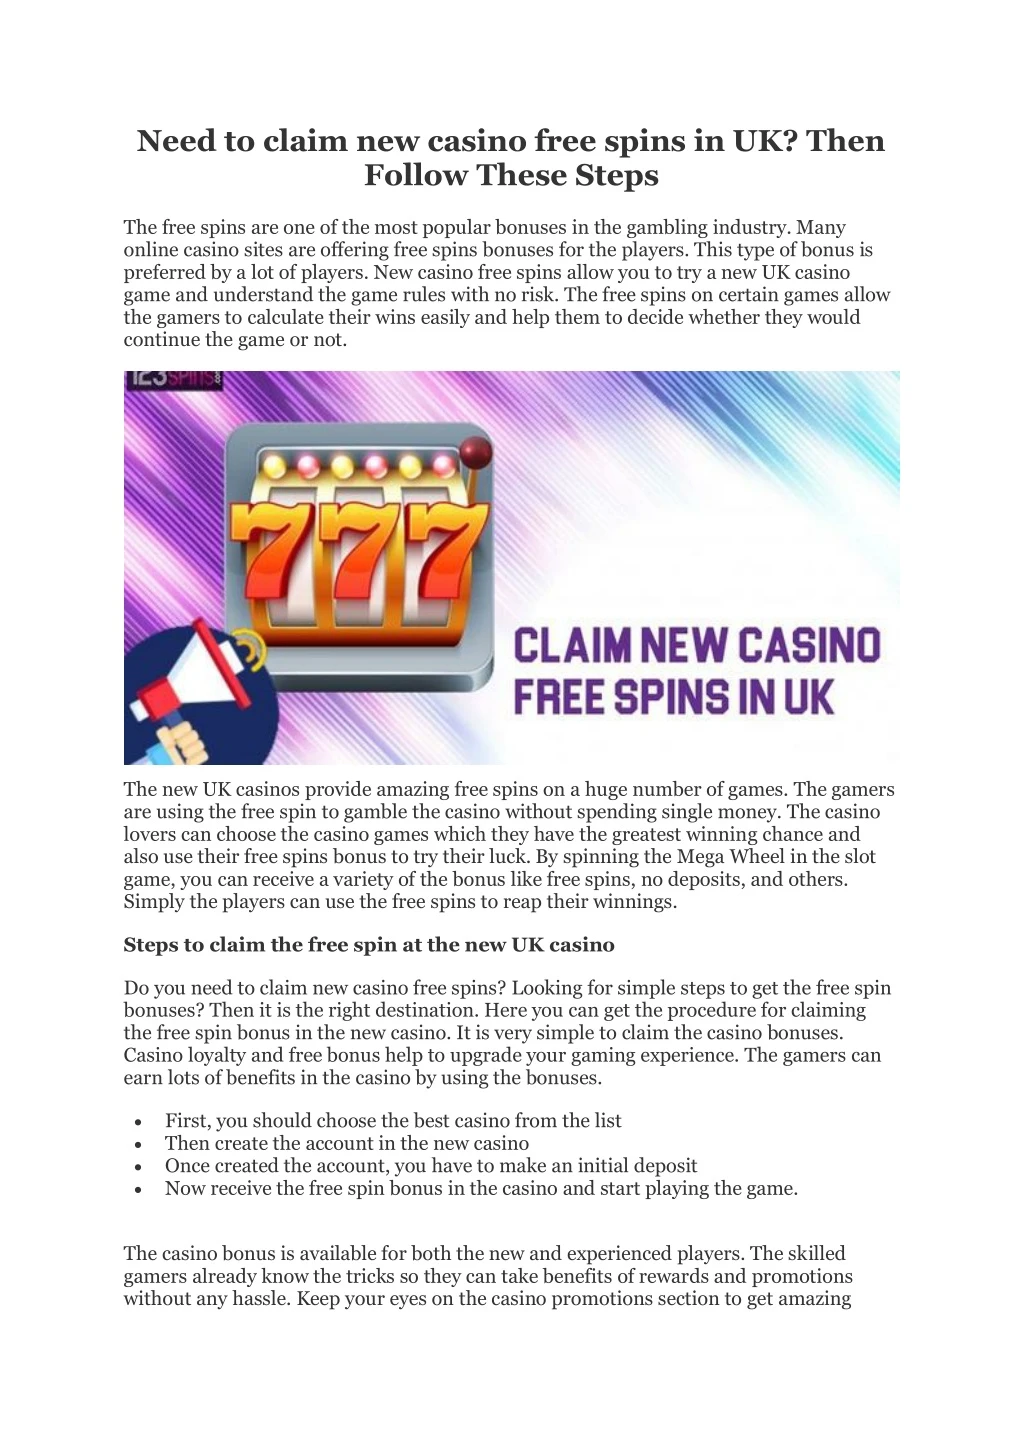 need to claim new casino free spins in uk then